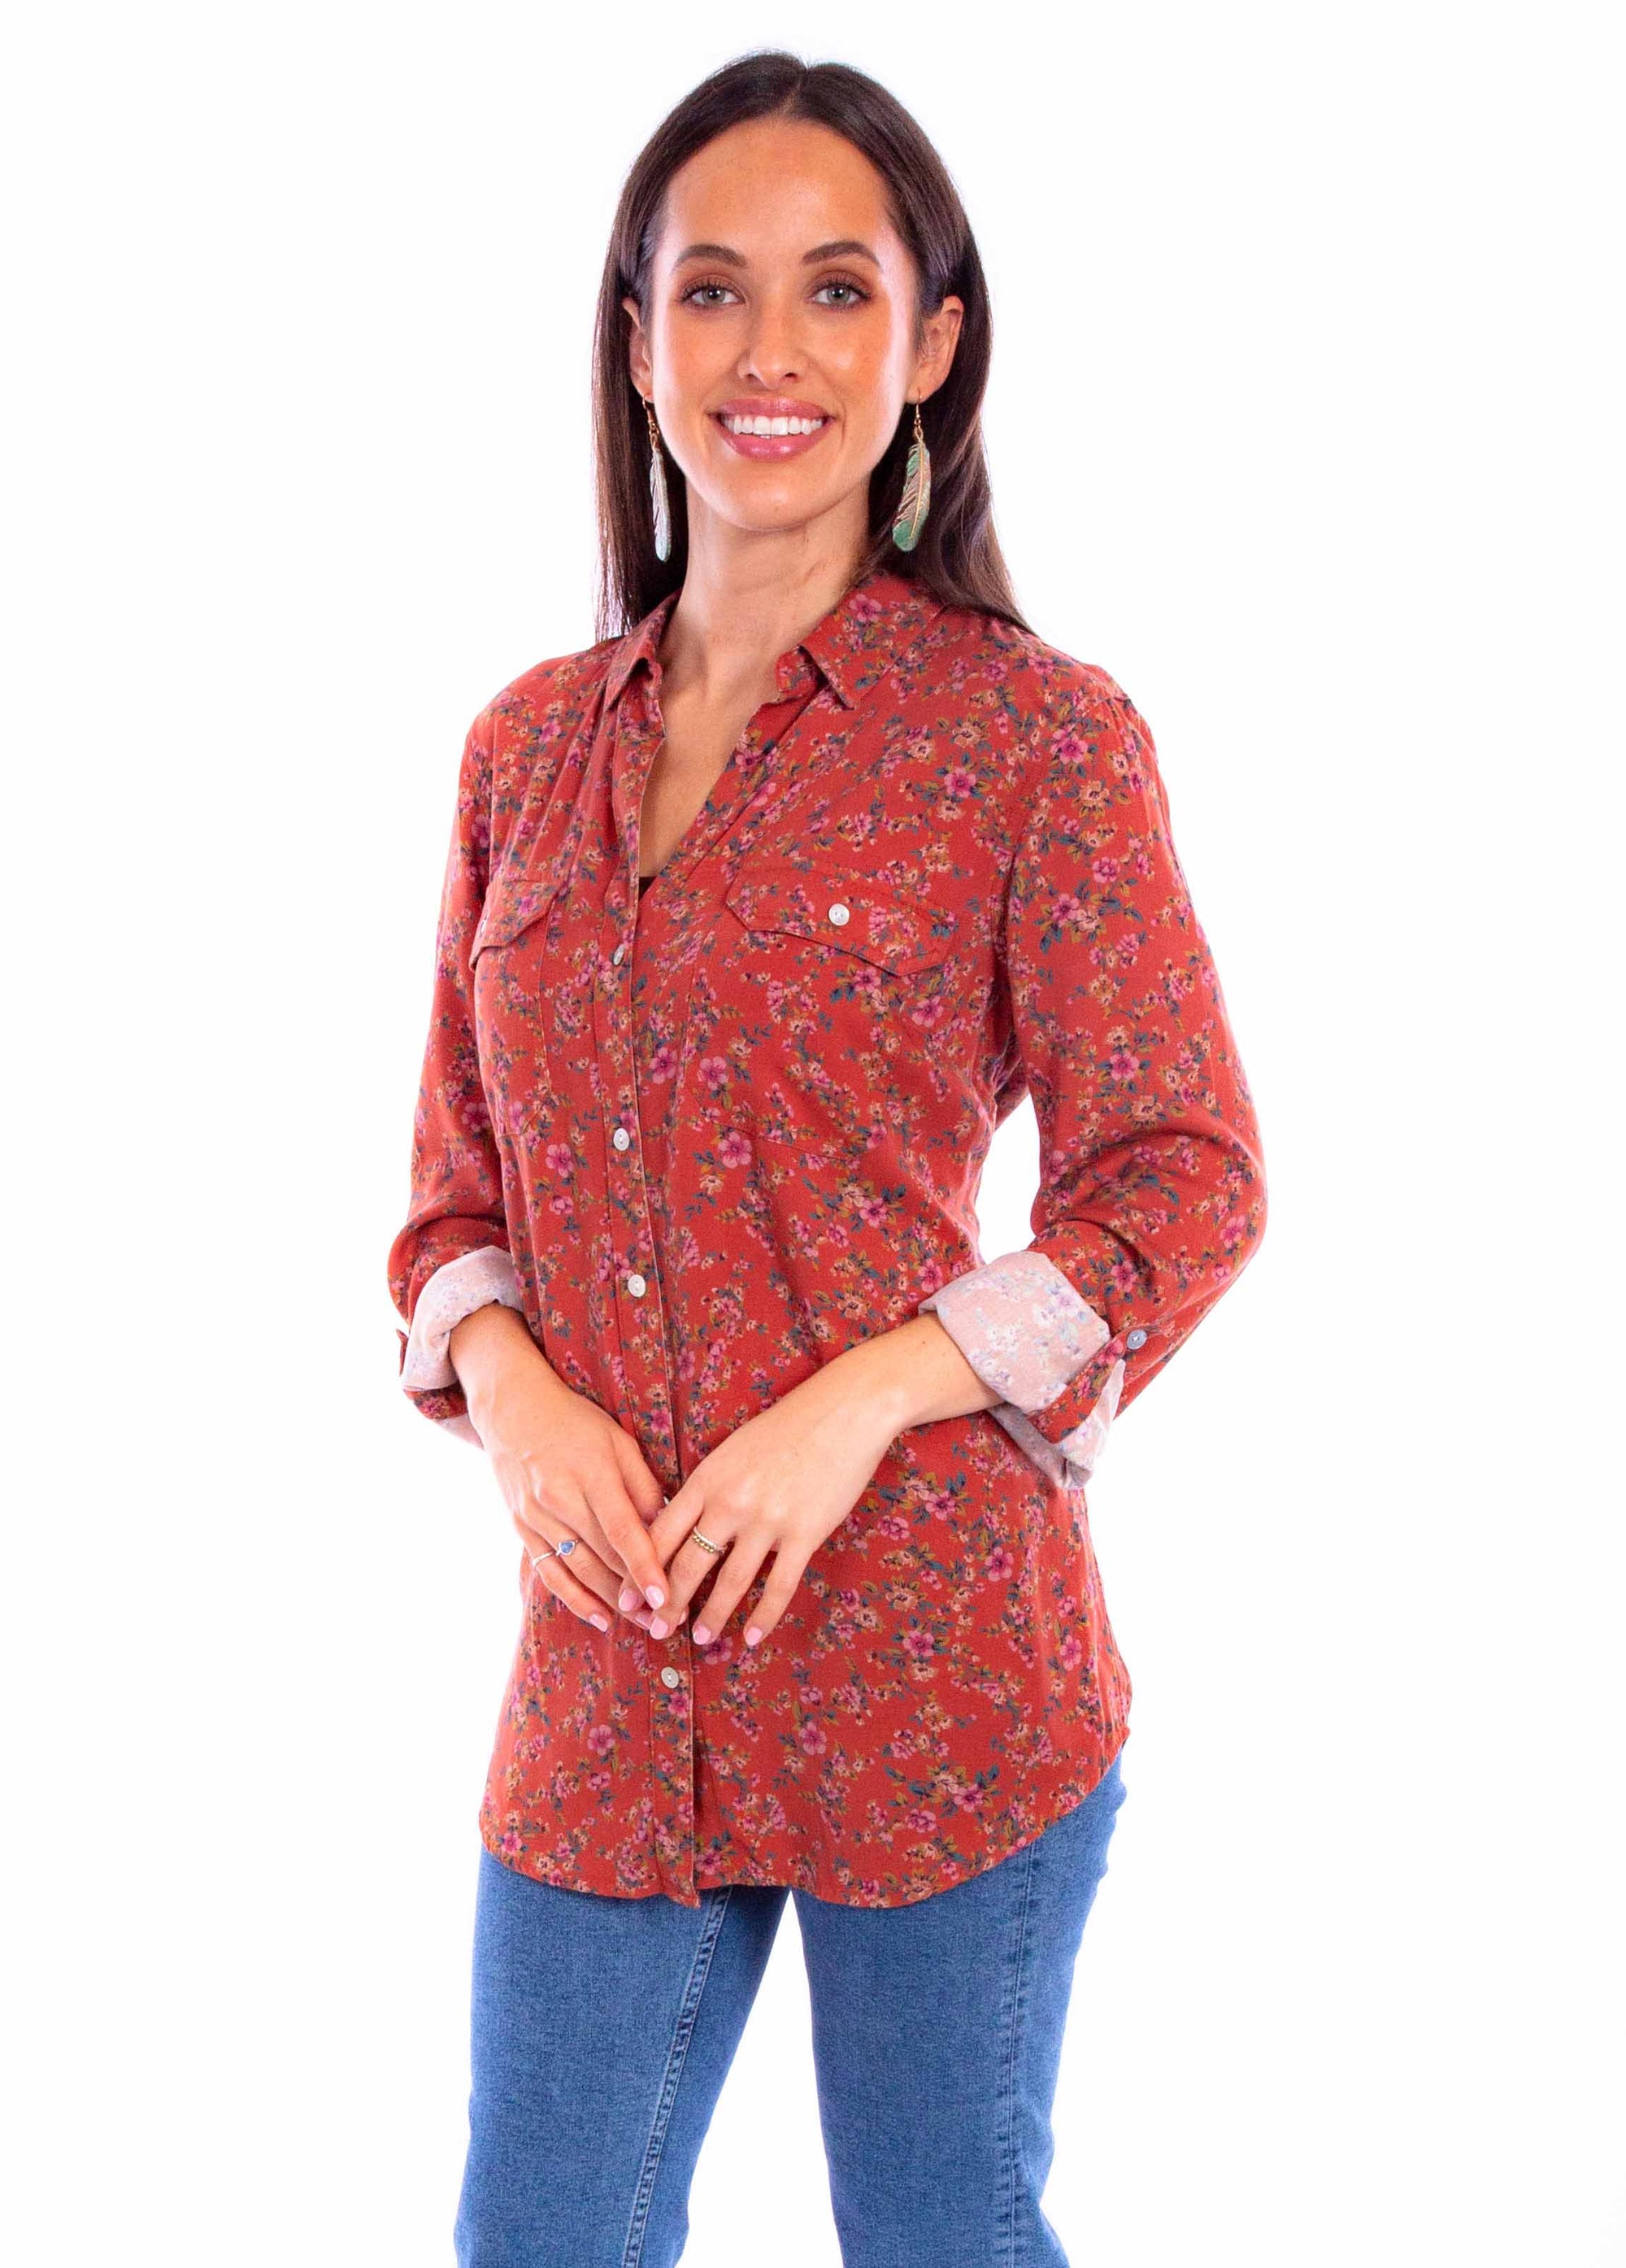 New Kid In Town Ditsy Floral Print Button Up Blouse